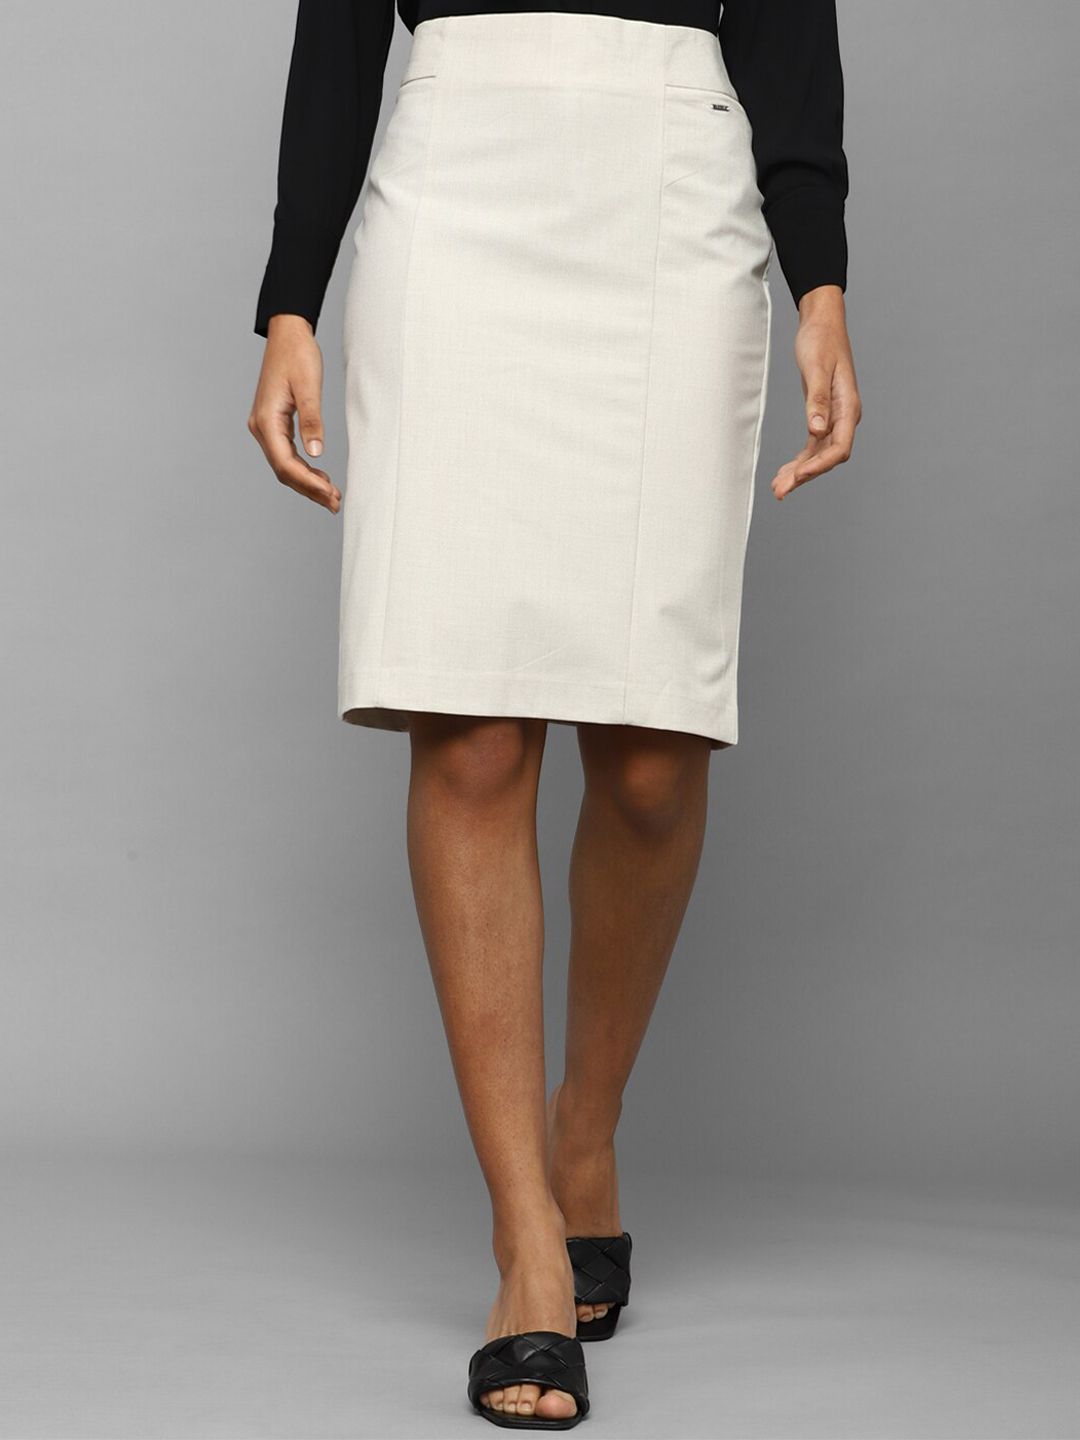 Allen Solly Woman Straight Knee Length Skirt Price in India